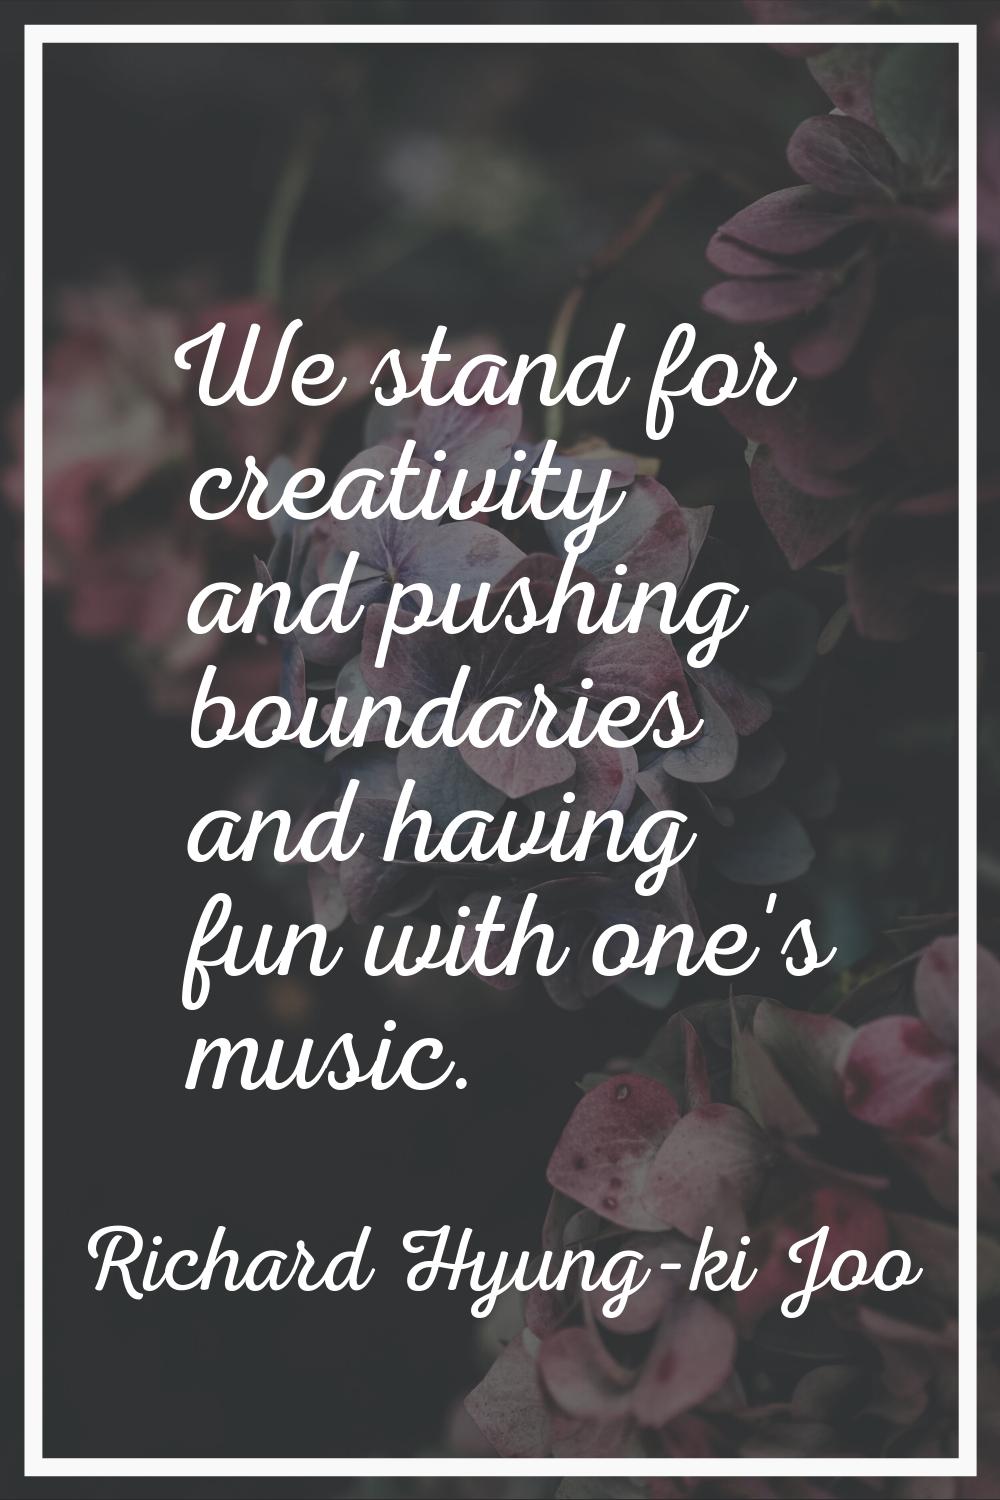 We stand for creativity and pushing boundaries and having fun with one's music.